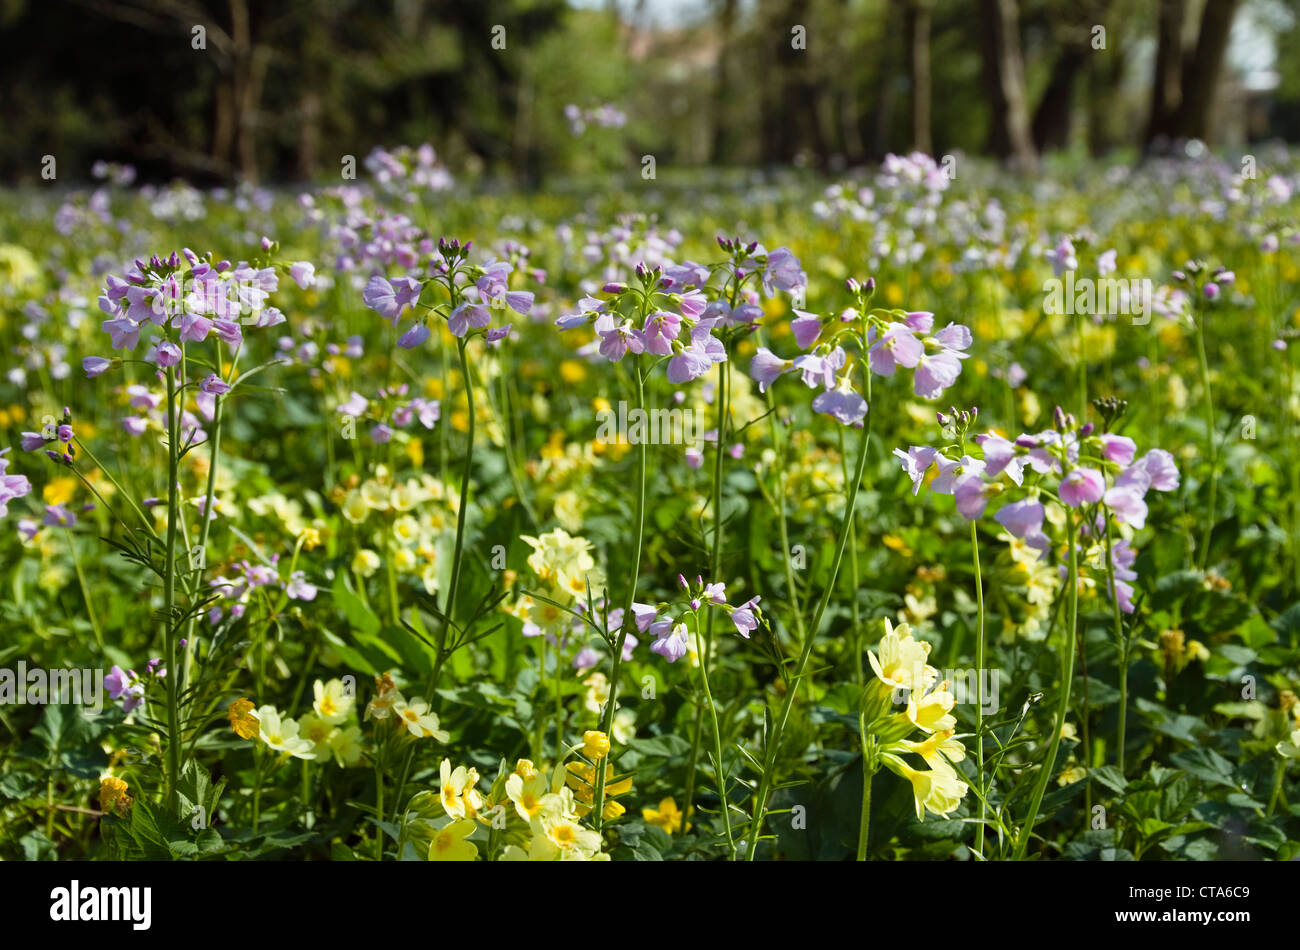 Flower meadow with lady's smock (Cardamine pratensis) and oxlips (Primula elatior), Upper Bavaria, Germany Stock Photo